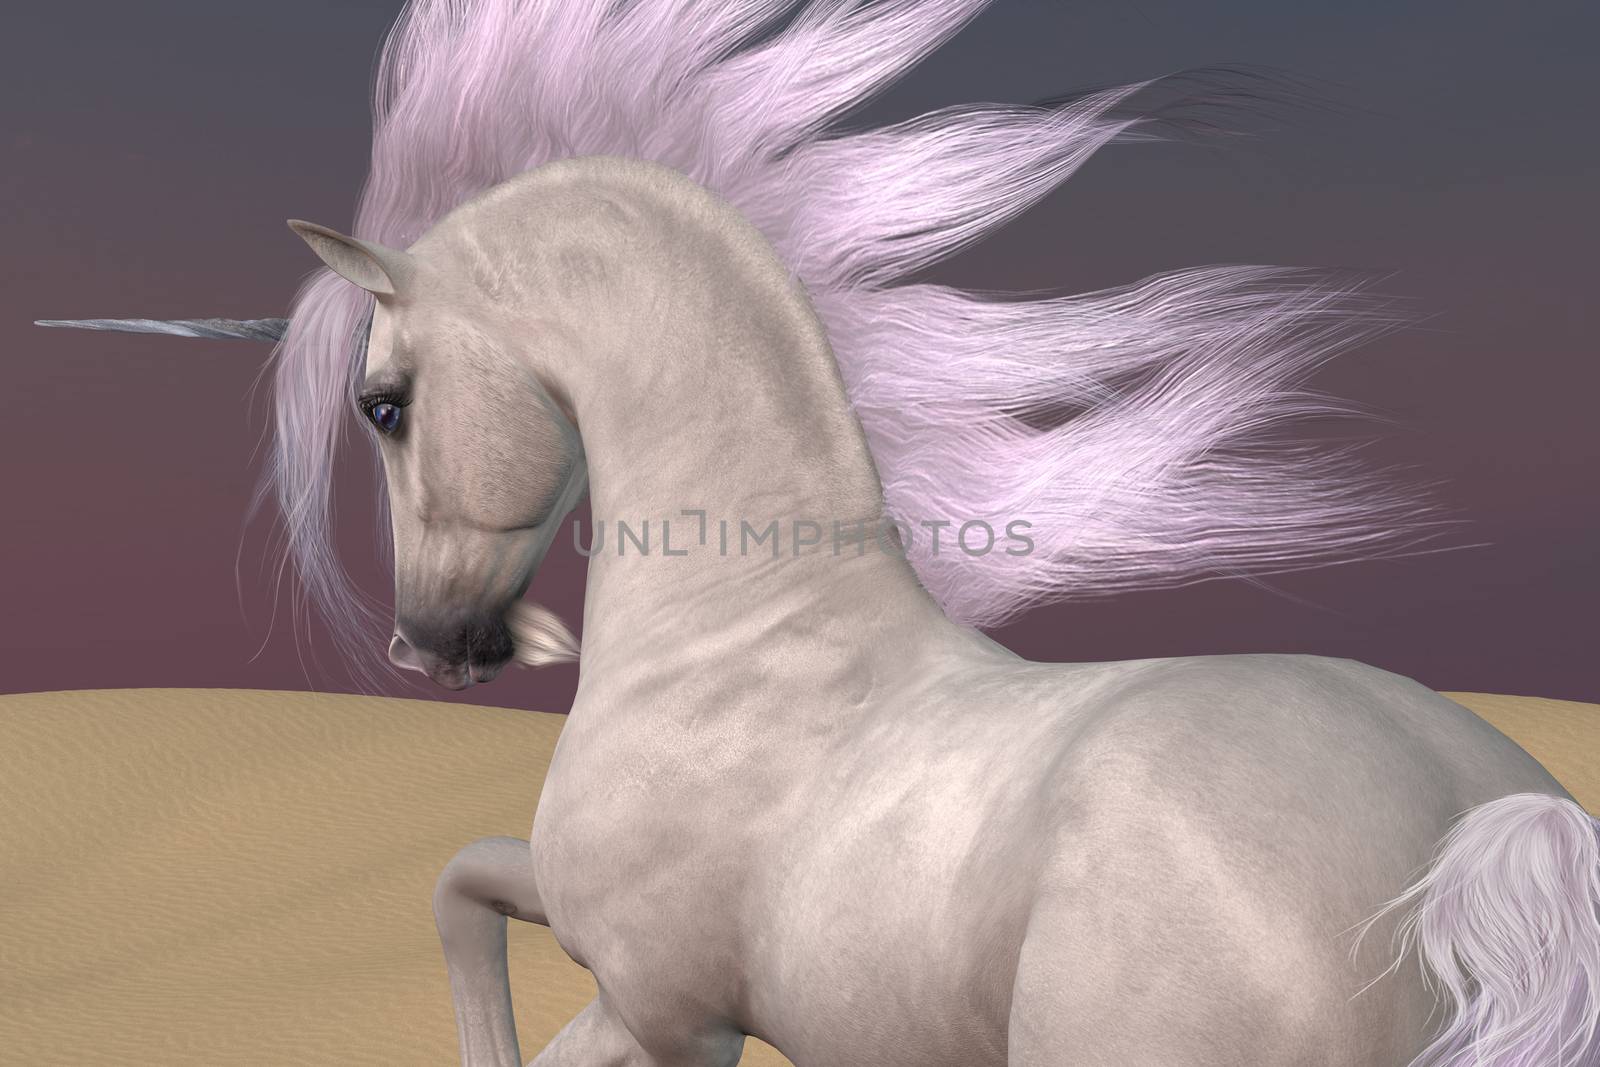 A Unicorn is a creature of myth and fantasy and has cloven hooves, forehead horn and a beard.